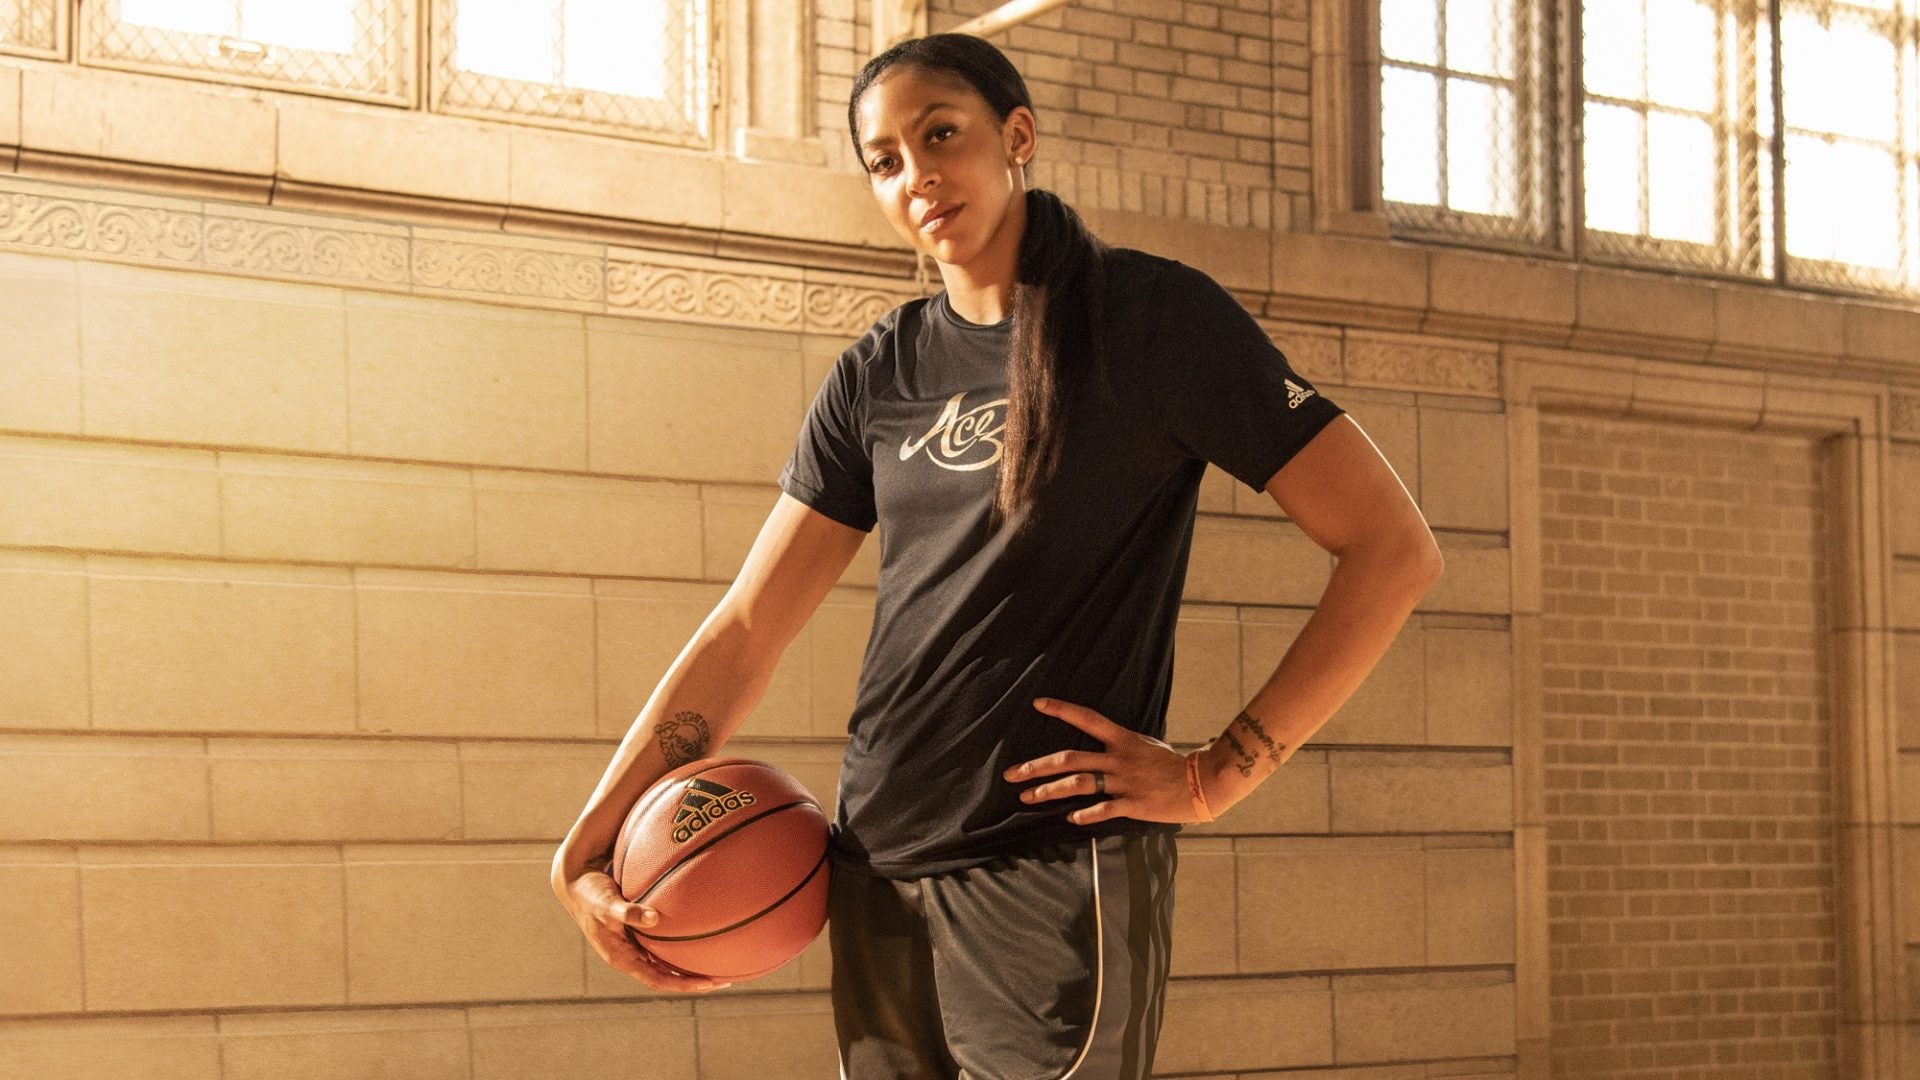 WNBA Star Candace Parker's Favorite Love Language Is "Support And Represent What I Put Time And Energy Into"